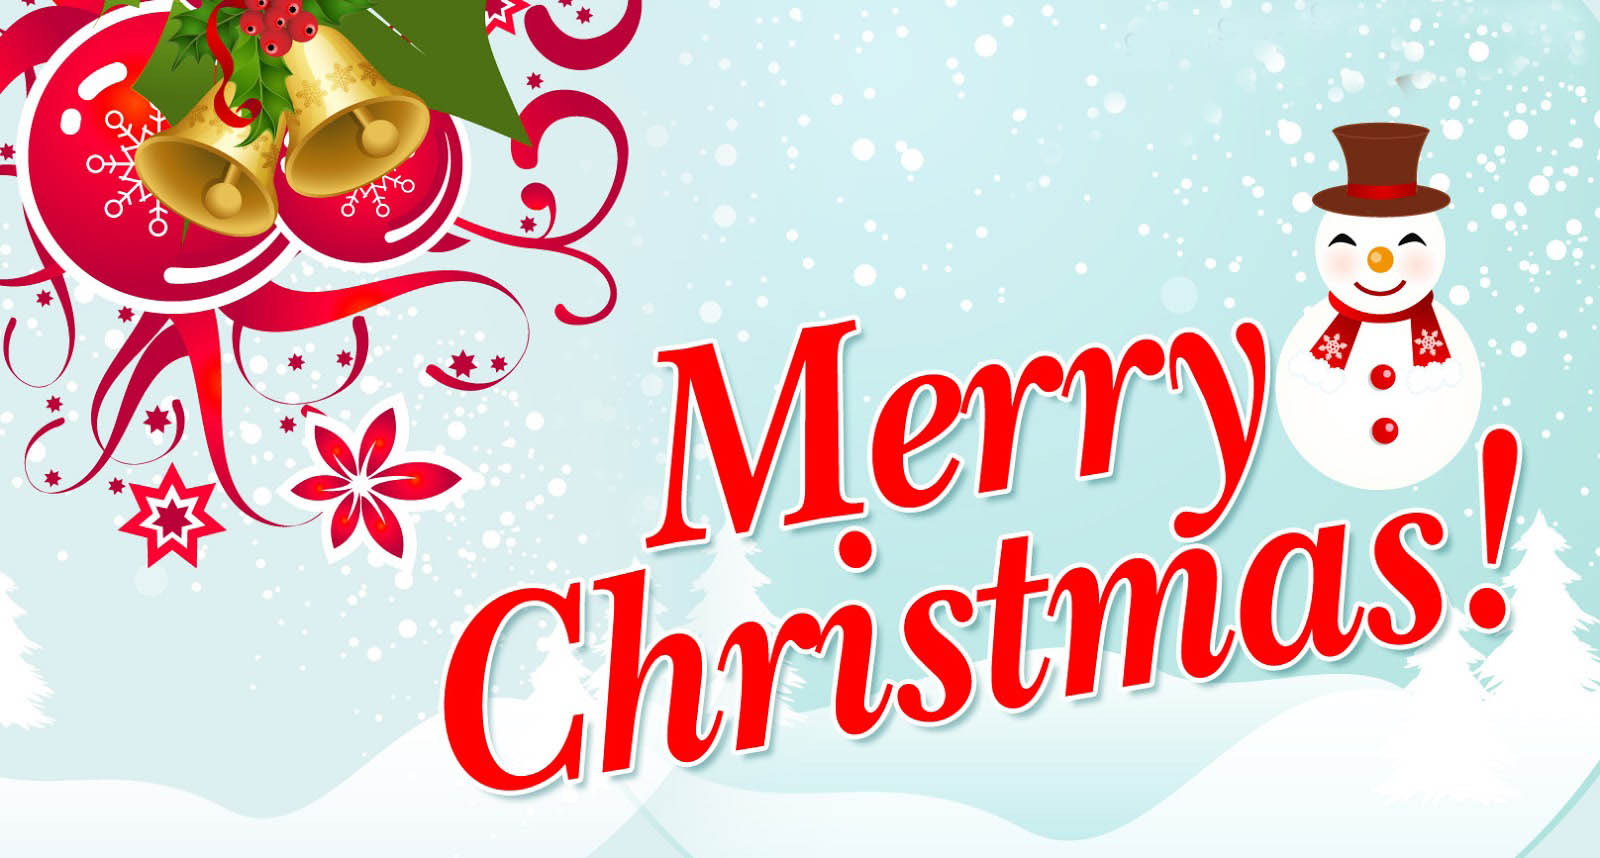 Cute Merry Christmas Wallpaper Download - Happy Christmas Merry Christmas -  1600x858 Wallpaper 